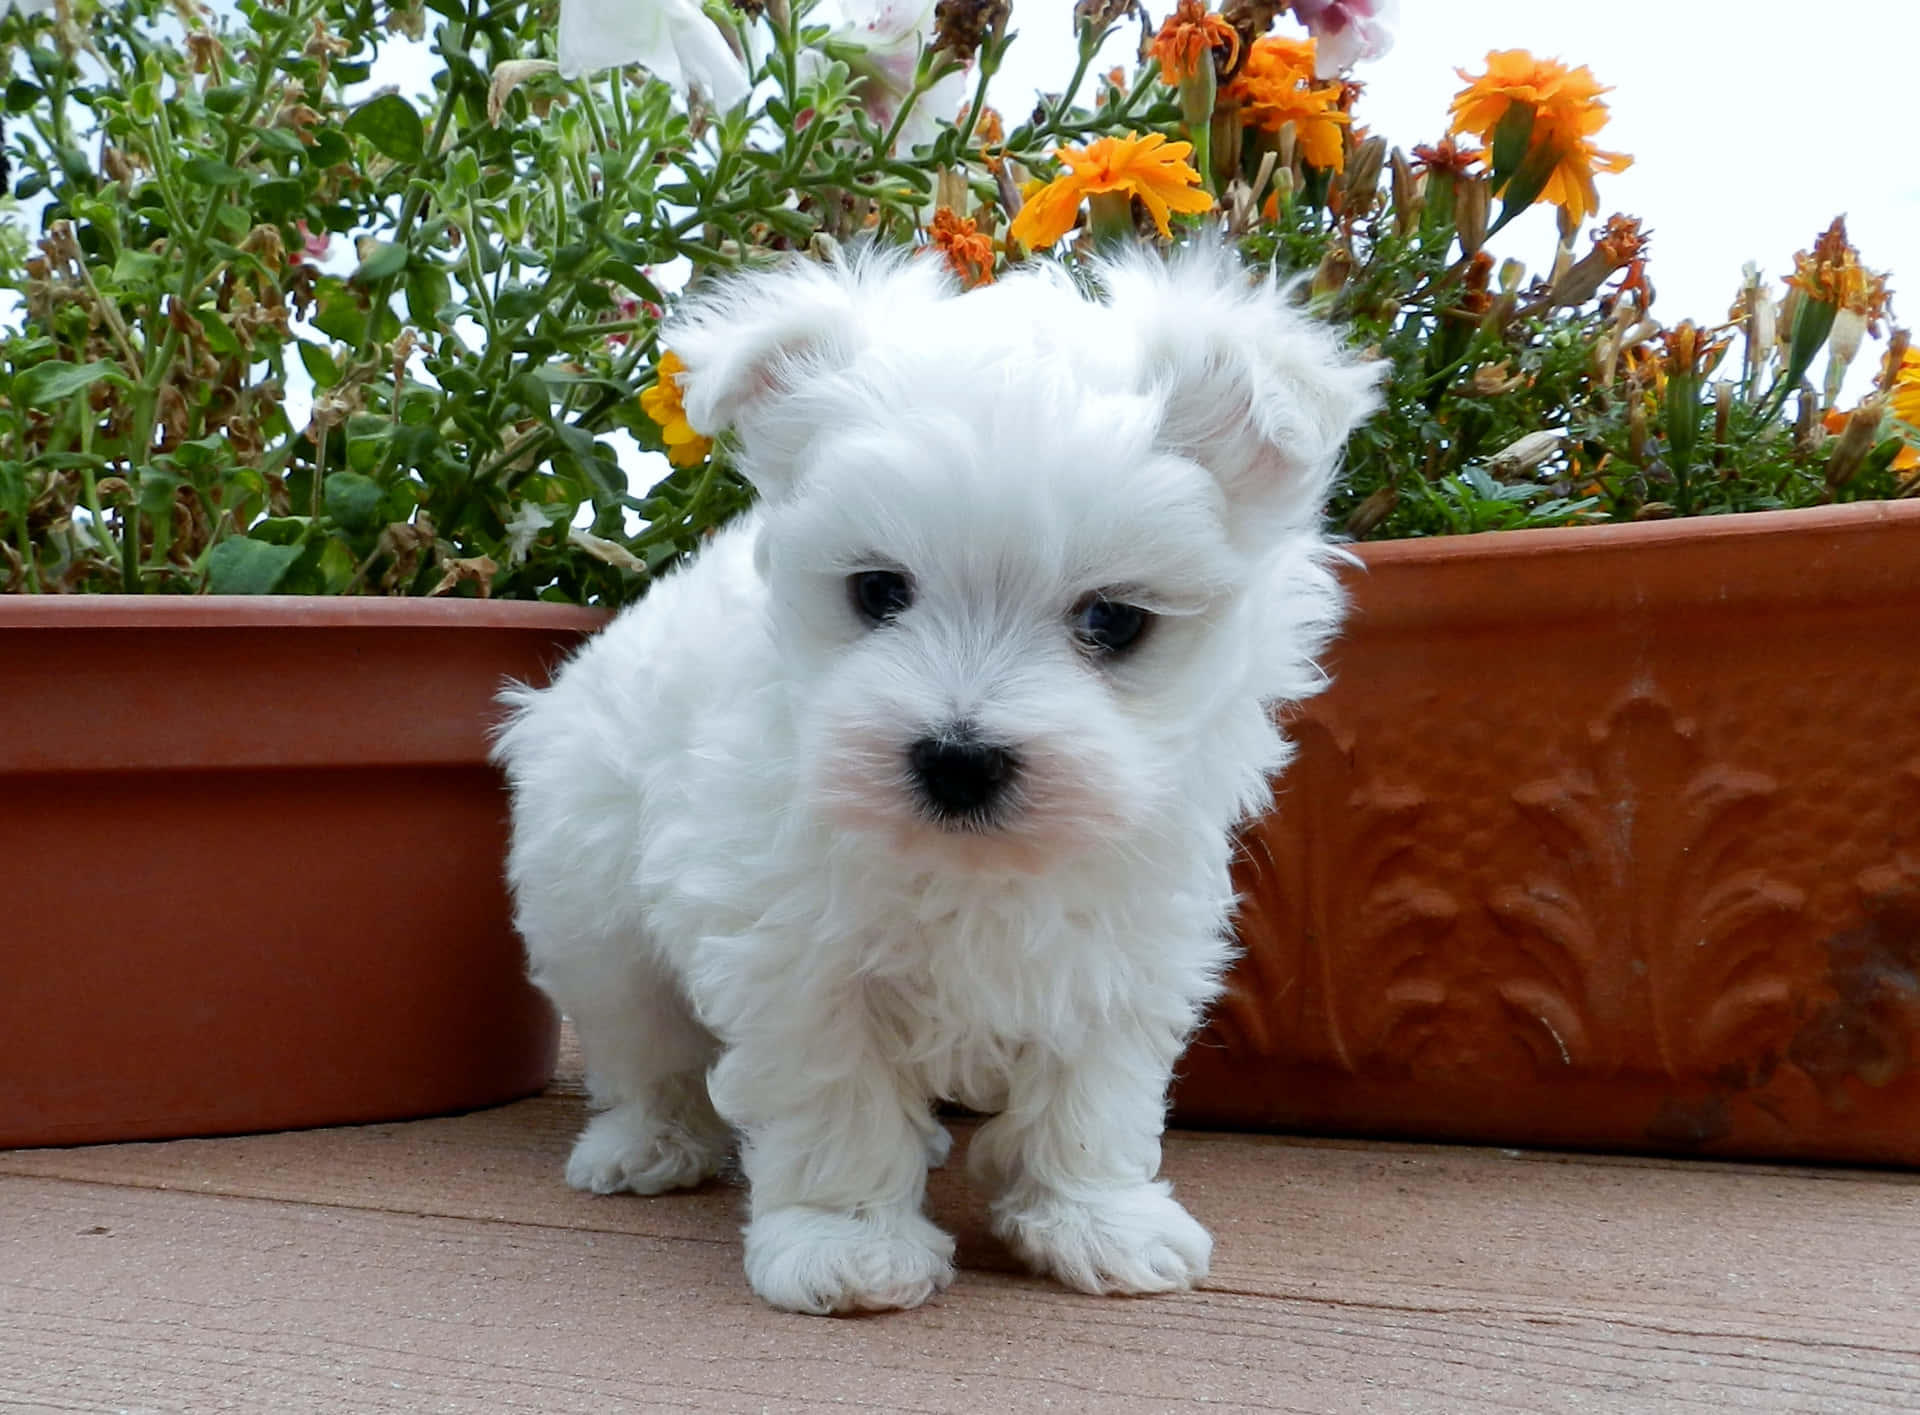 This cute and adorable Maltese Puppy will cheer you up